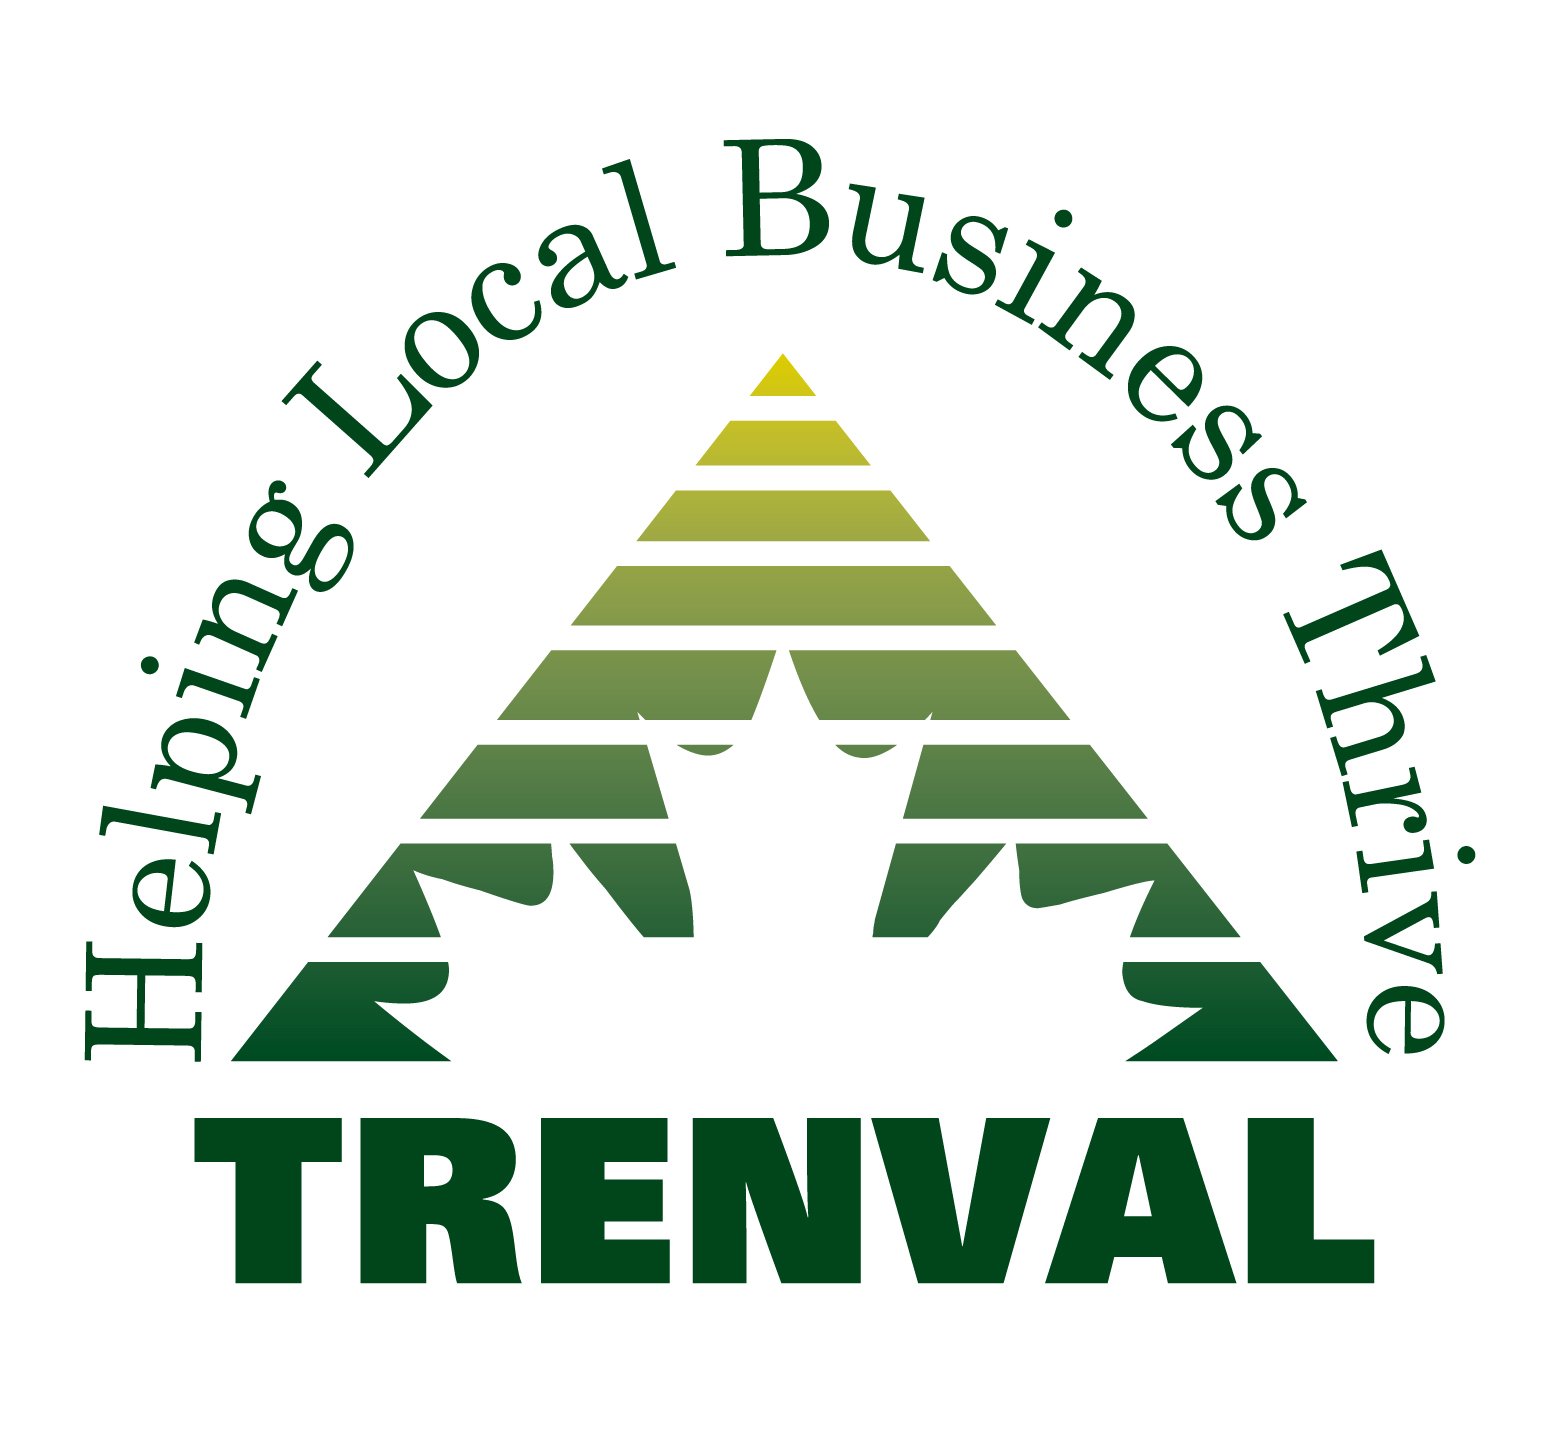 Trenval - Helping Local Business Thrive.jpg